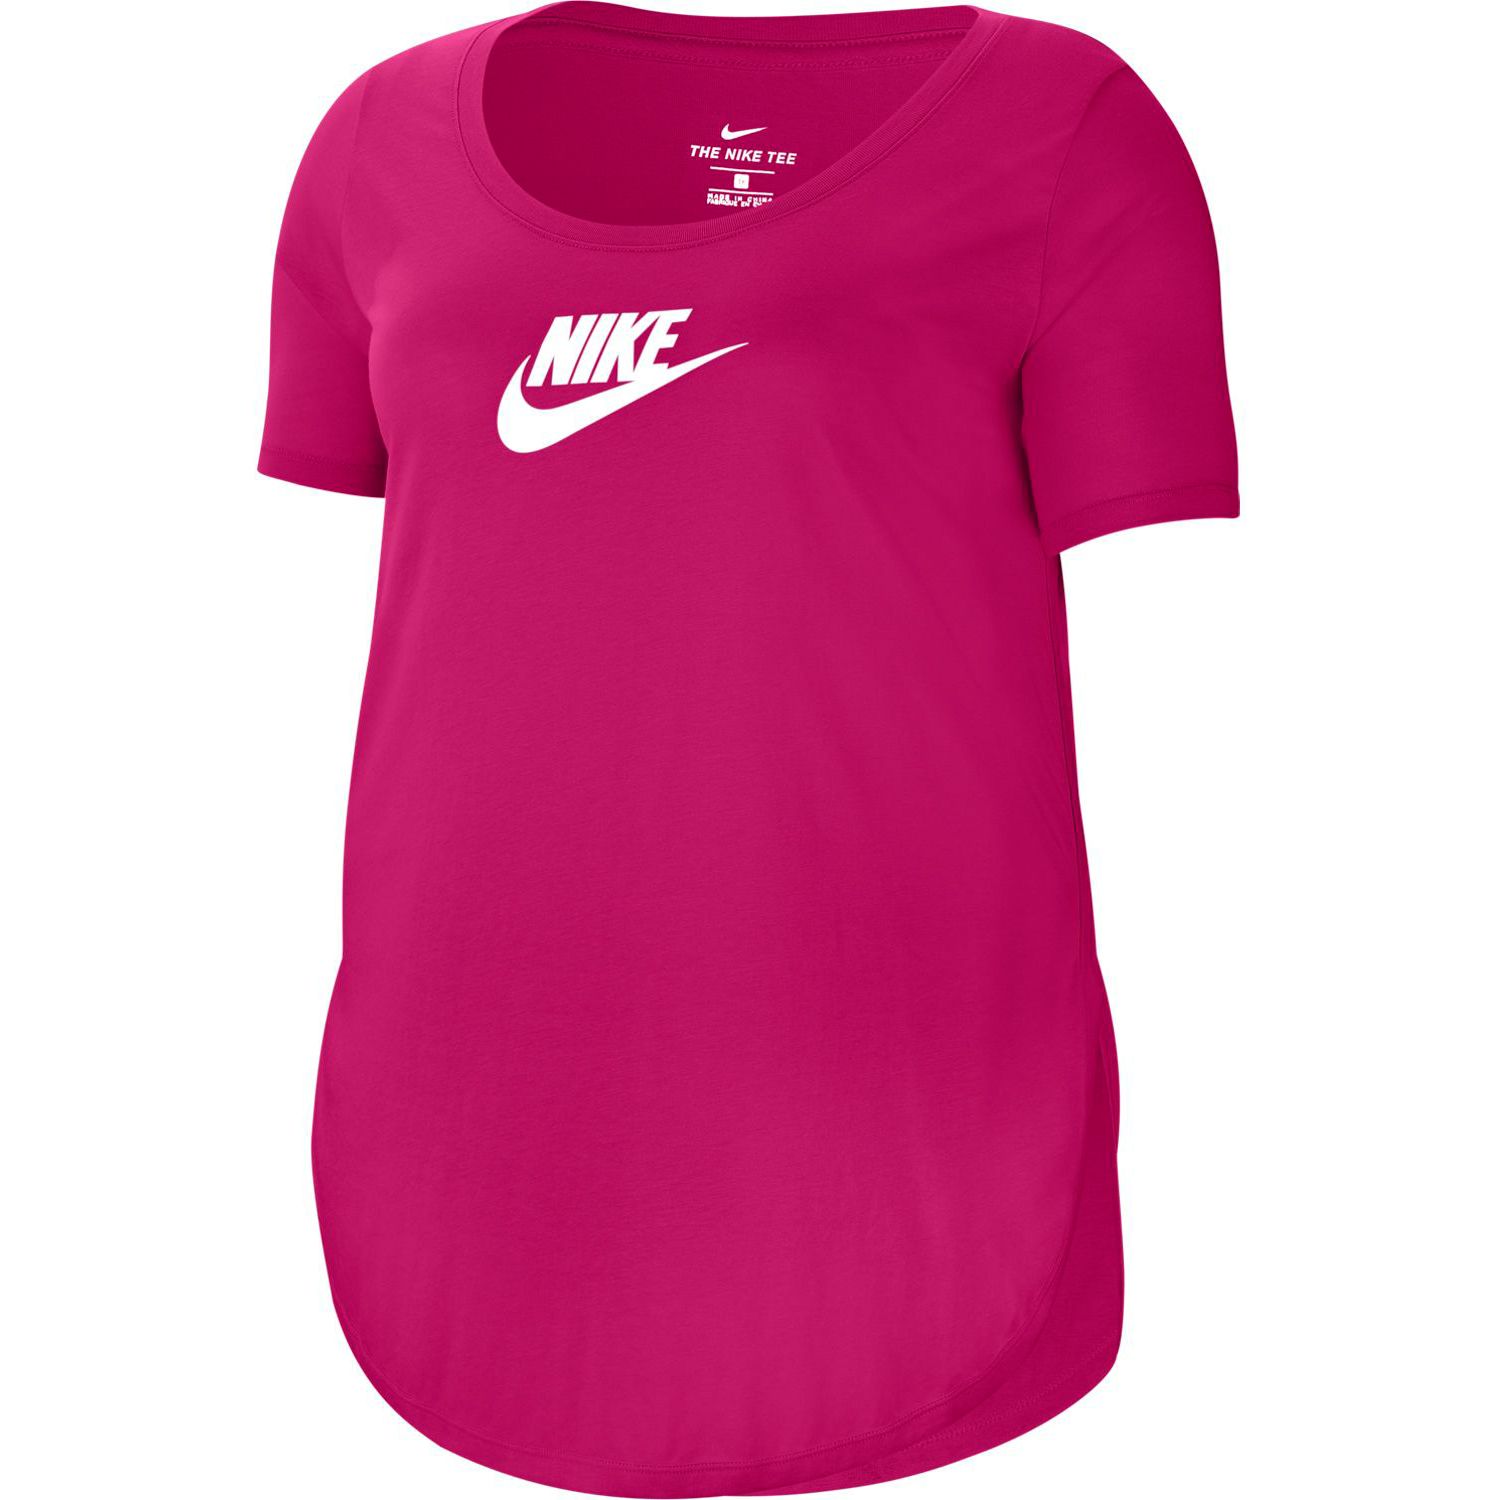 kohl's nike womens clothes